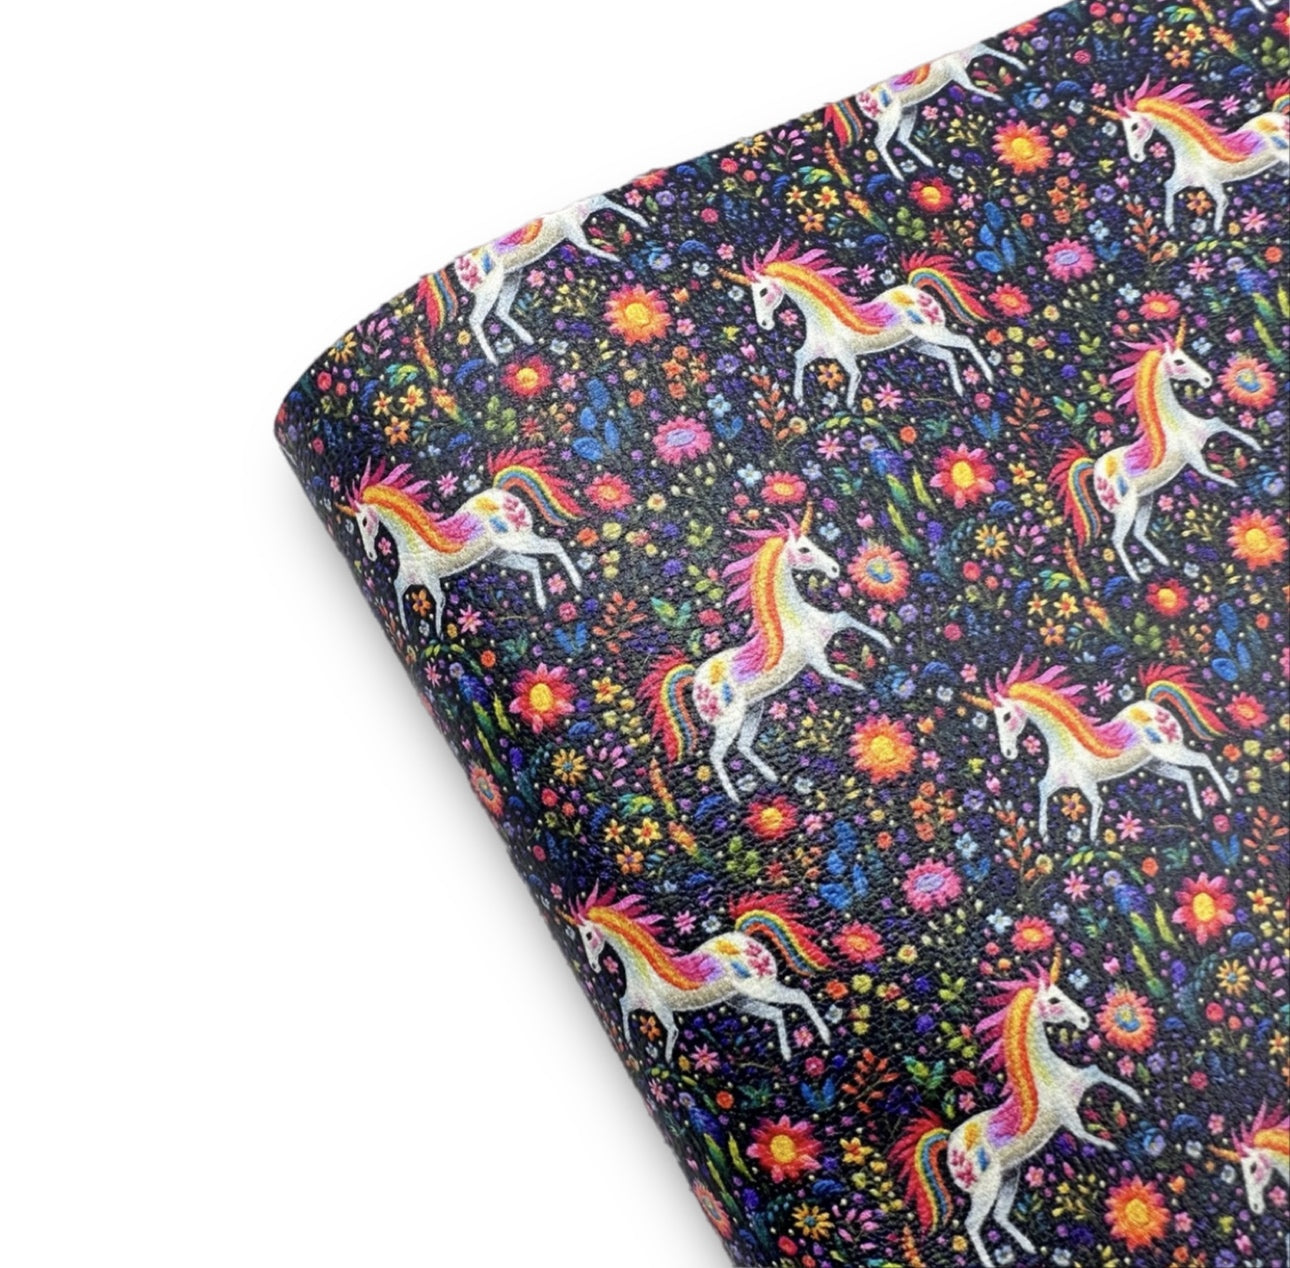 Embroidered Unicorns Premium Faux Leather Fabric Sheets